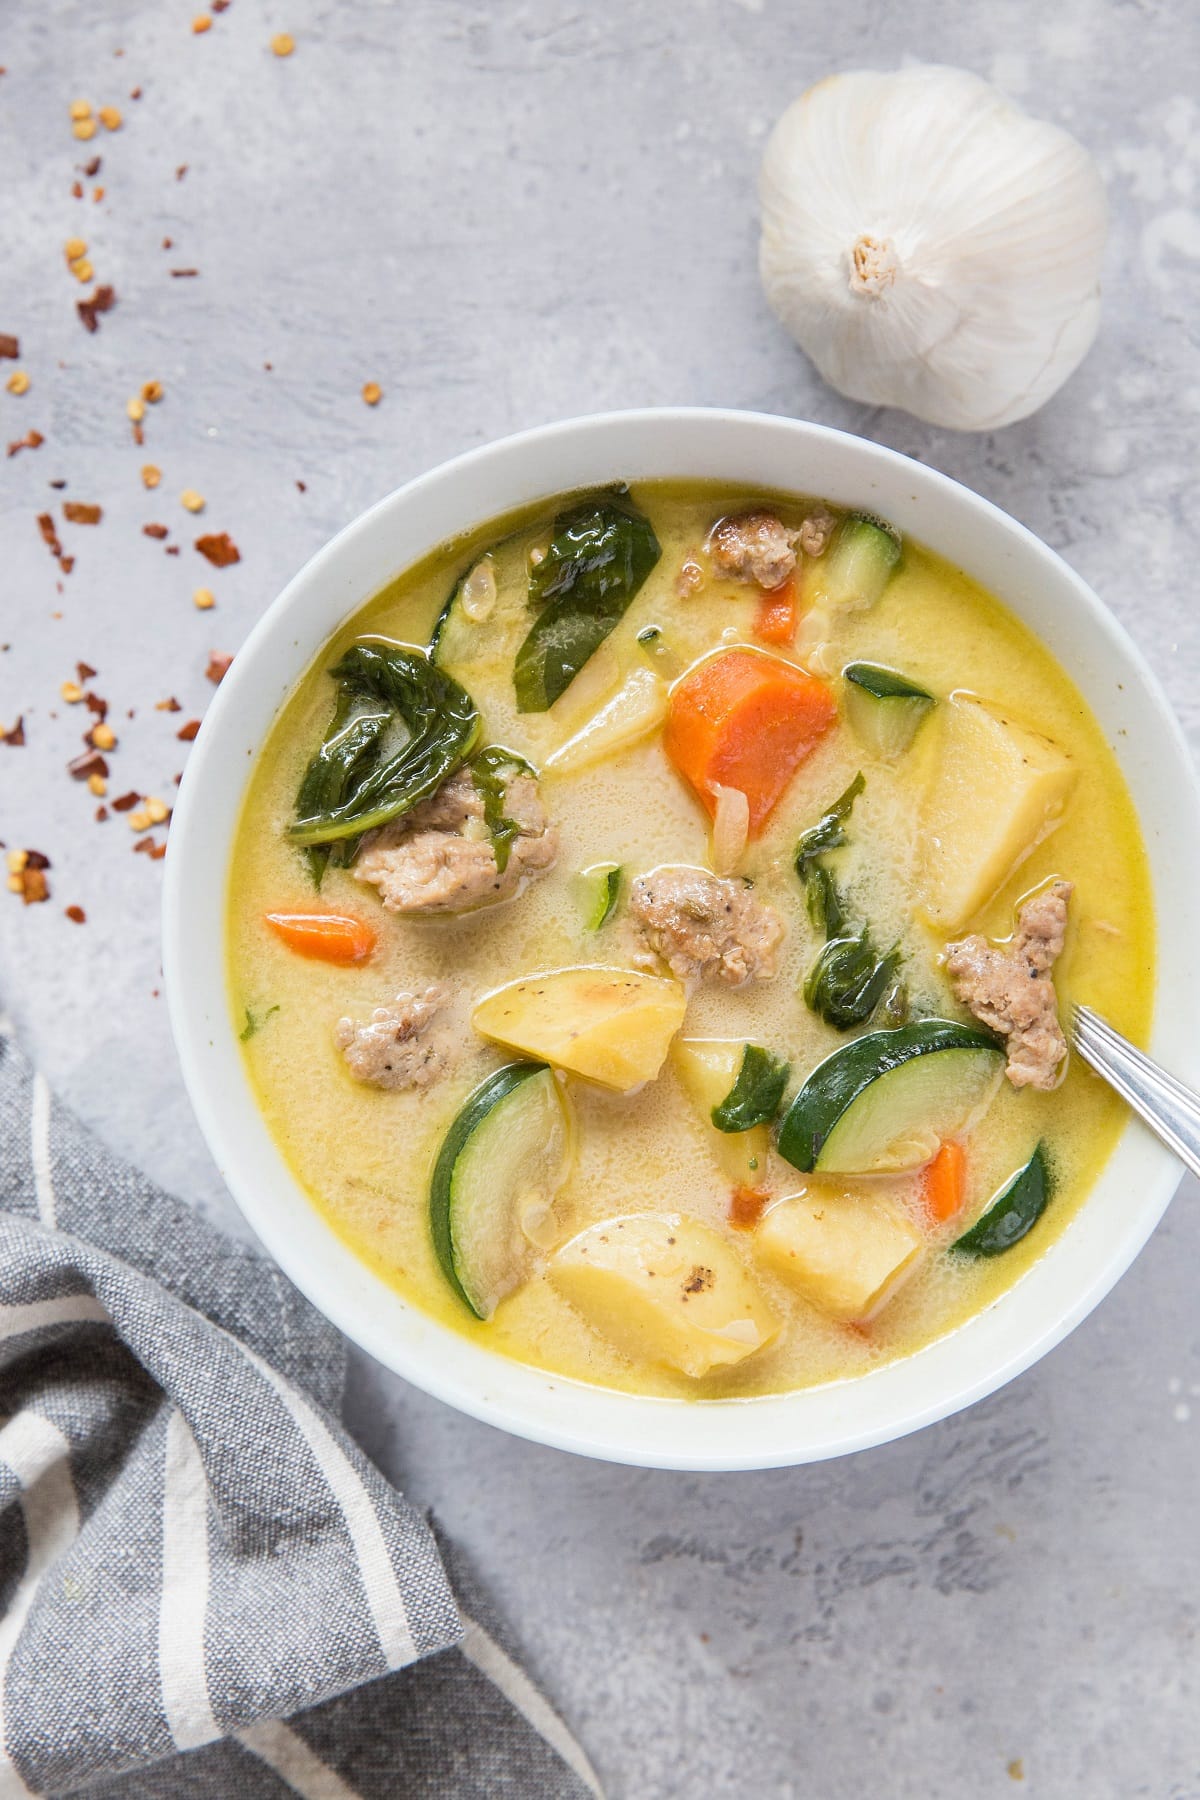 Hearty Ground Turkey Soup with Vegetables - The Roasted Root